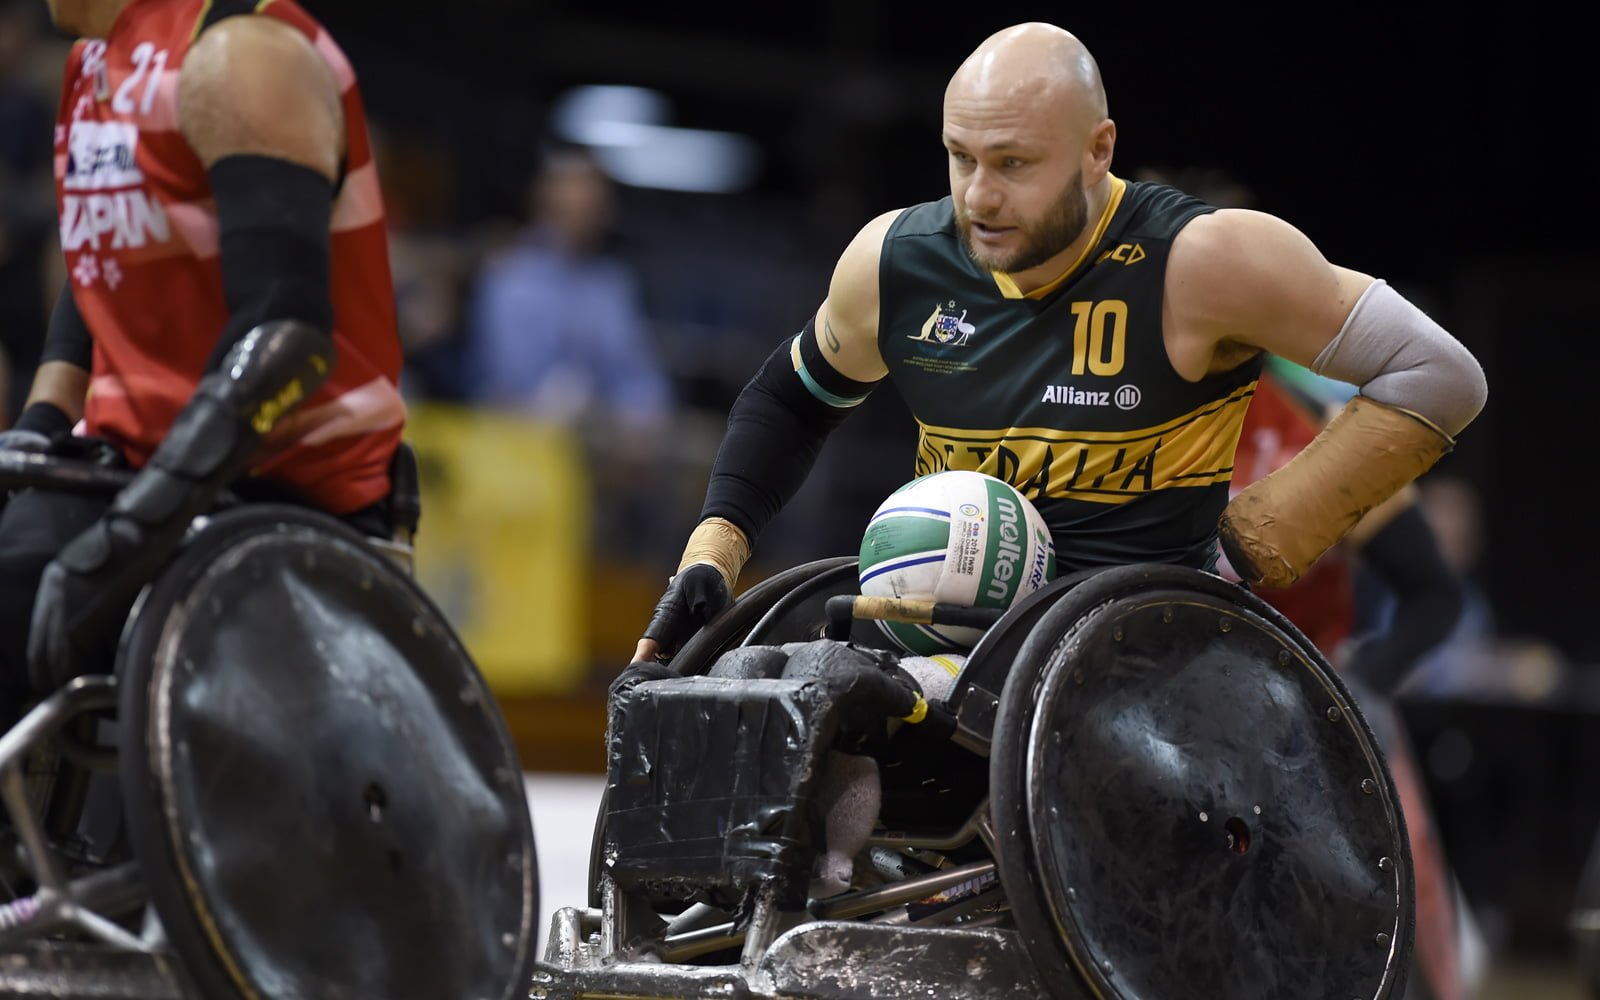 AIS confirms funding boost for seven Paralympic sports